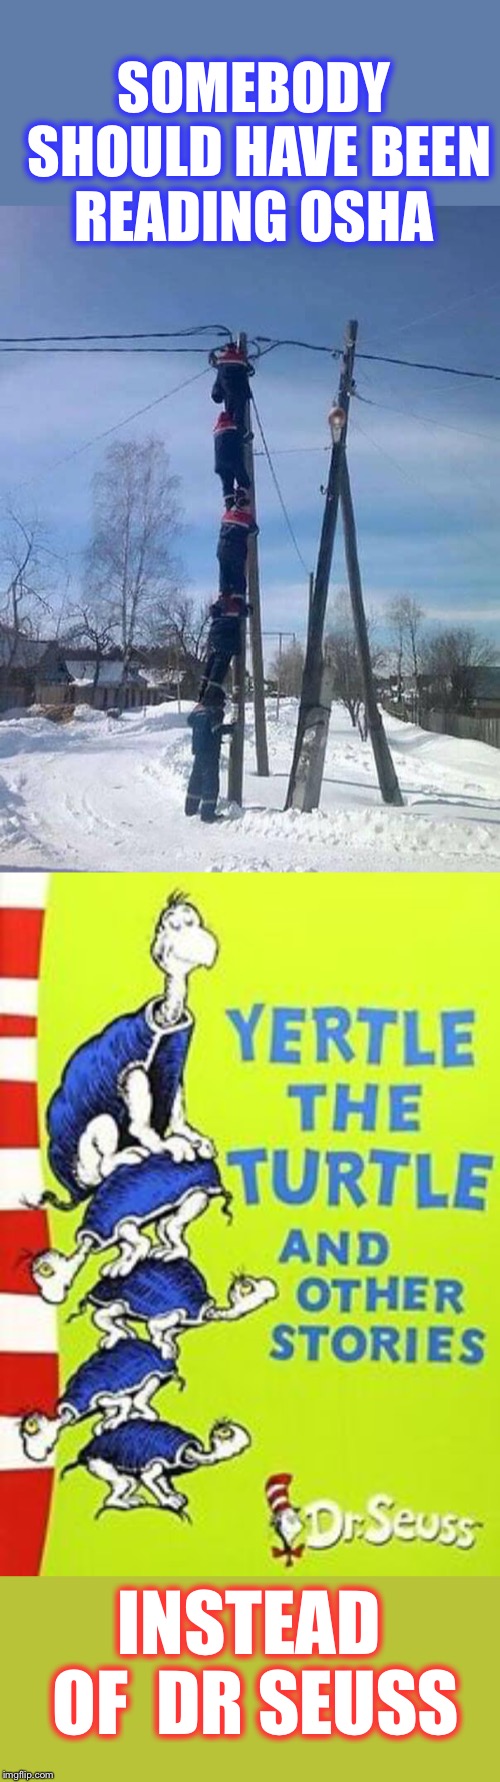 I think the foreman is Sam-I-Am | SOMEBODY SHOULD HAVE BEEN READING OSHA; INSTEAD OF  DR SEUSS | image tagged in dr seuss,yertle the turtle | made w/ Imgflip meme maker